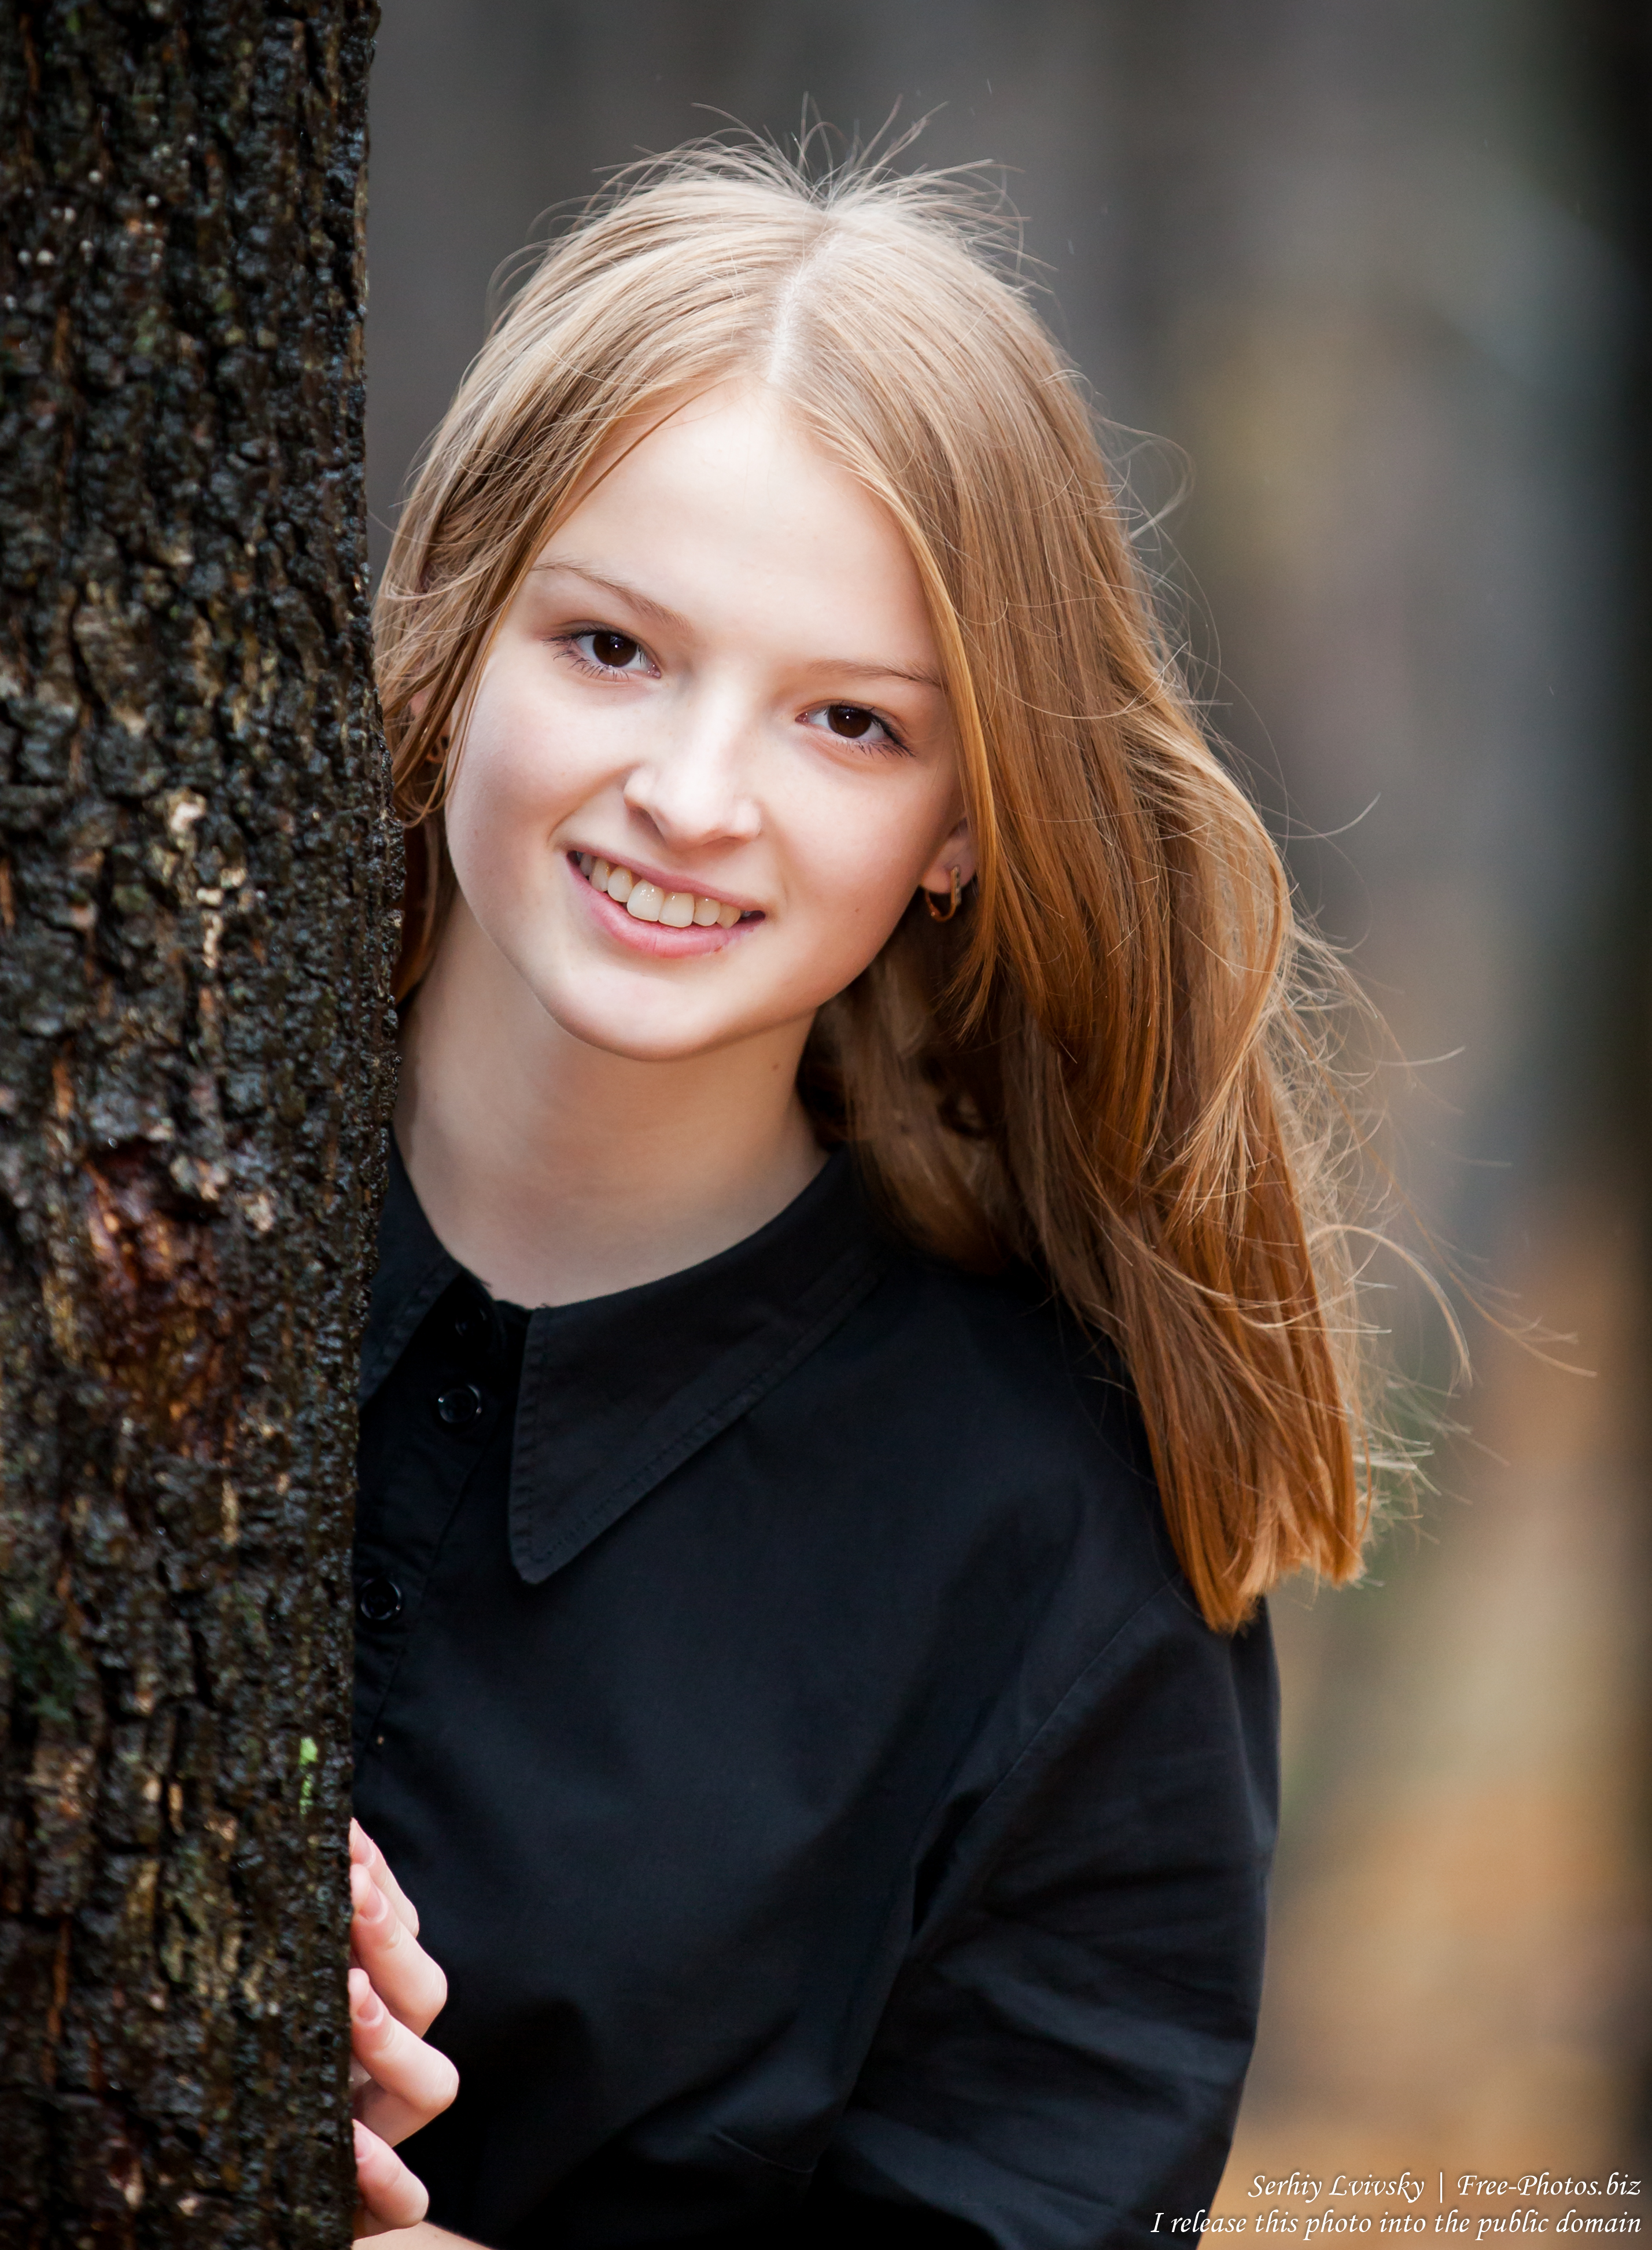 a 13-year-old Catholic girl photographed by Serhiy Lvivsky in November 2015, picture 2